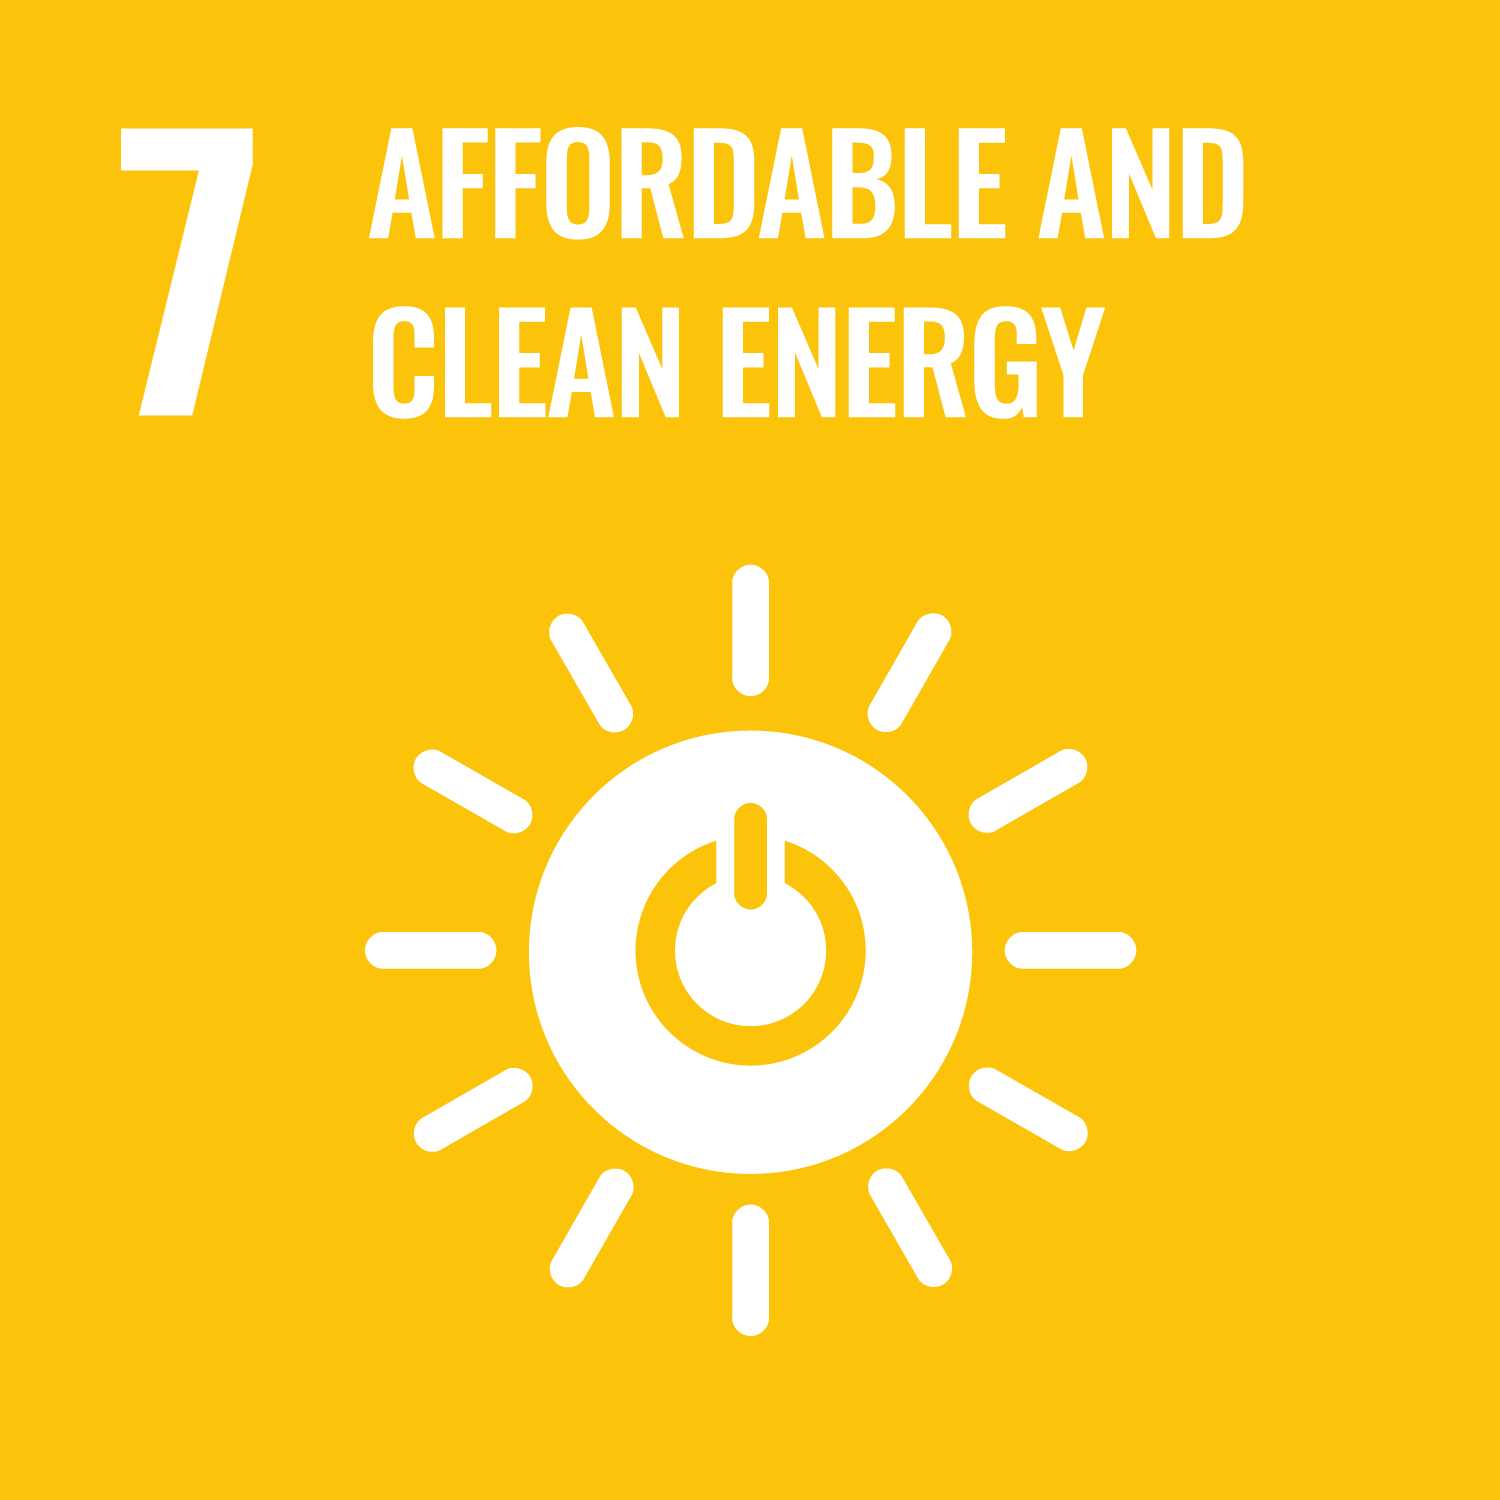 Sustainable Development Goal 7 – Affordable and Clean Energy